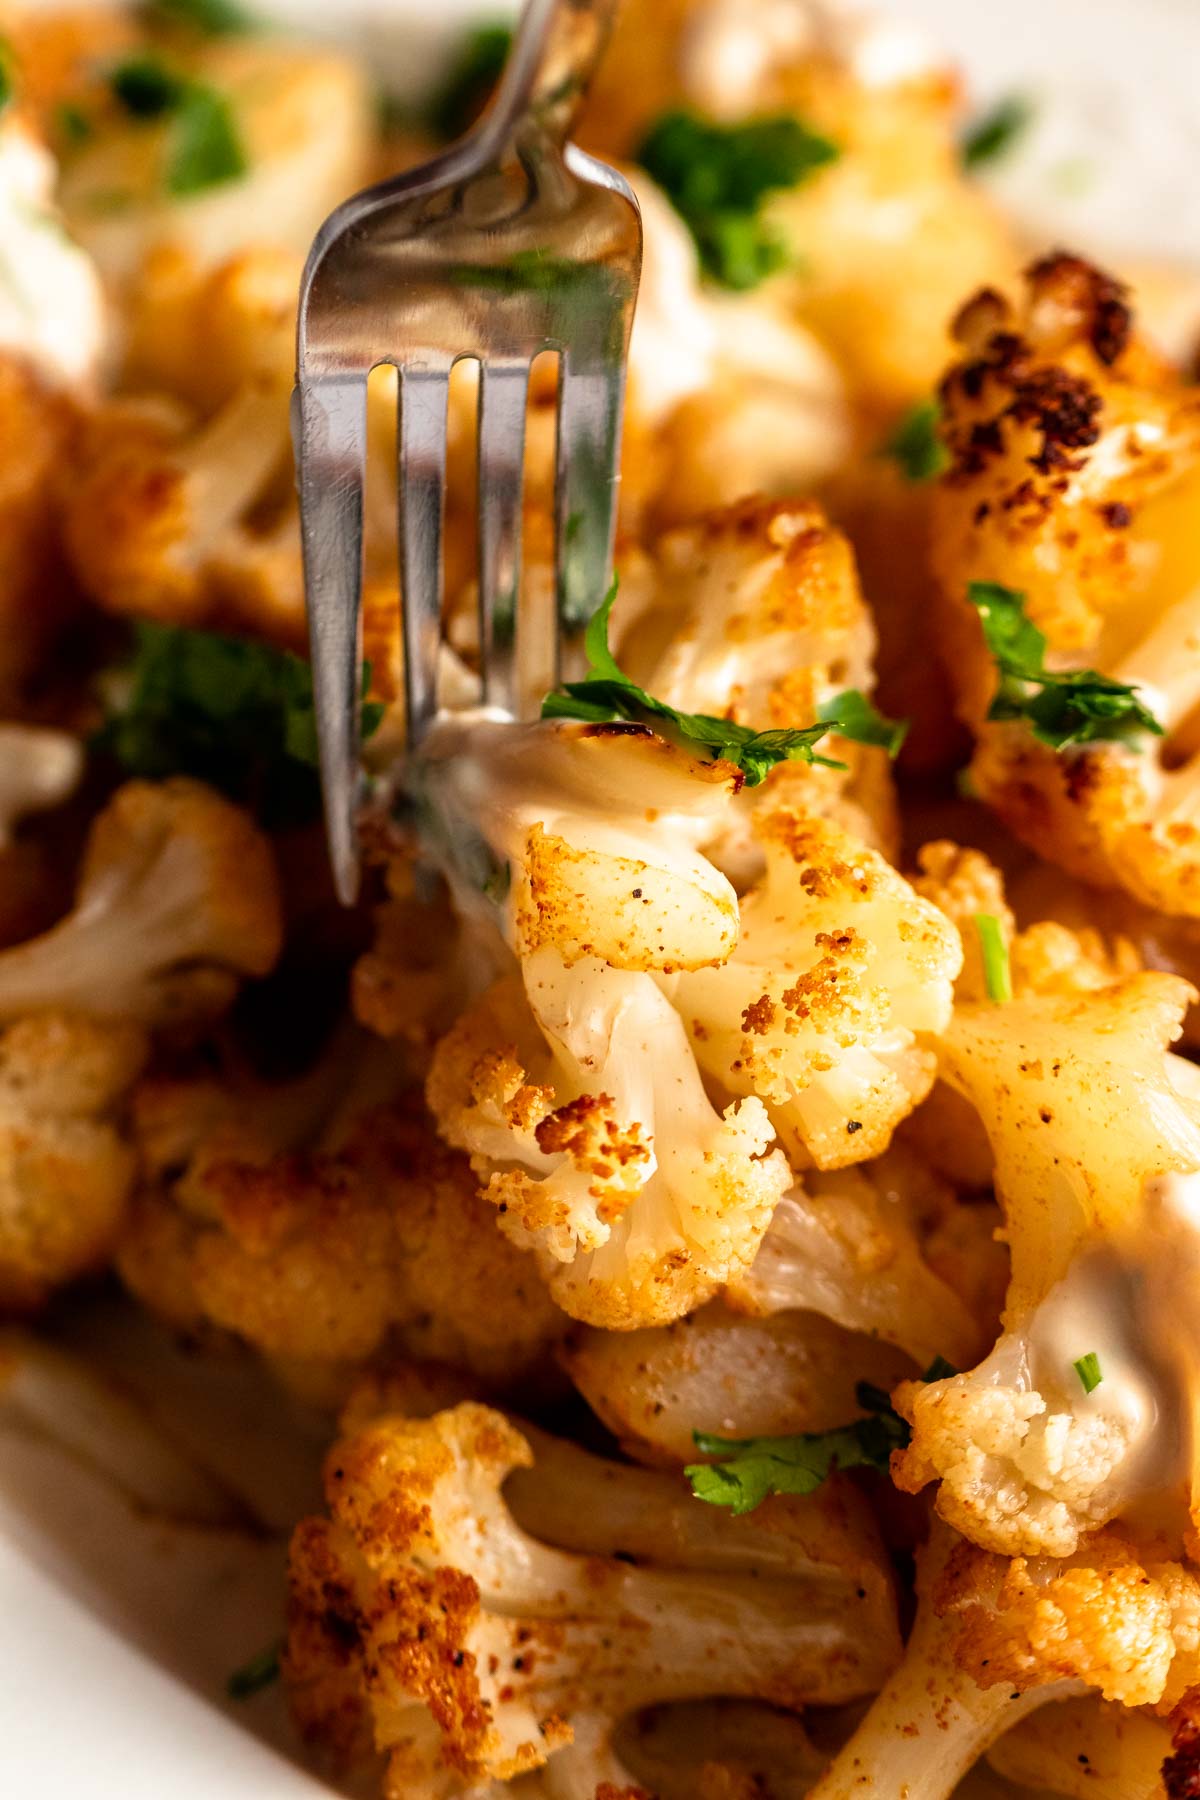 Fork inserted into a piece of roasted cauliflower.